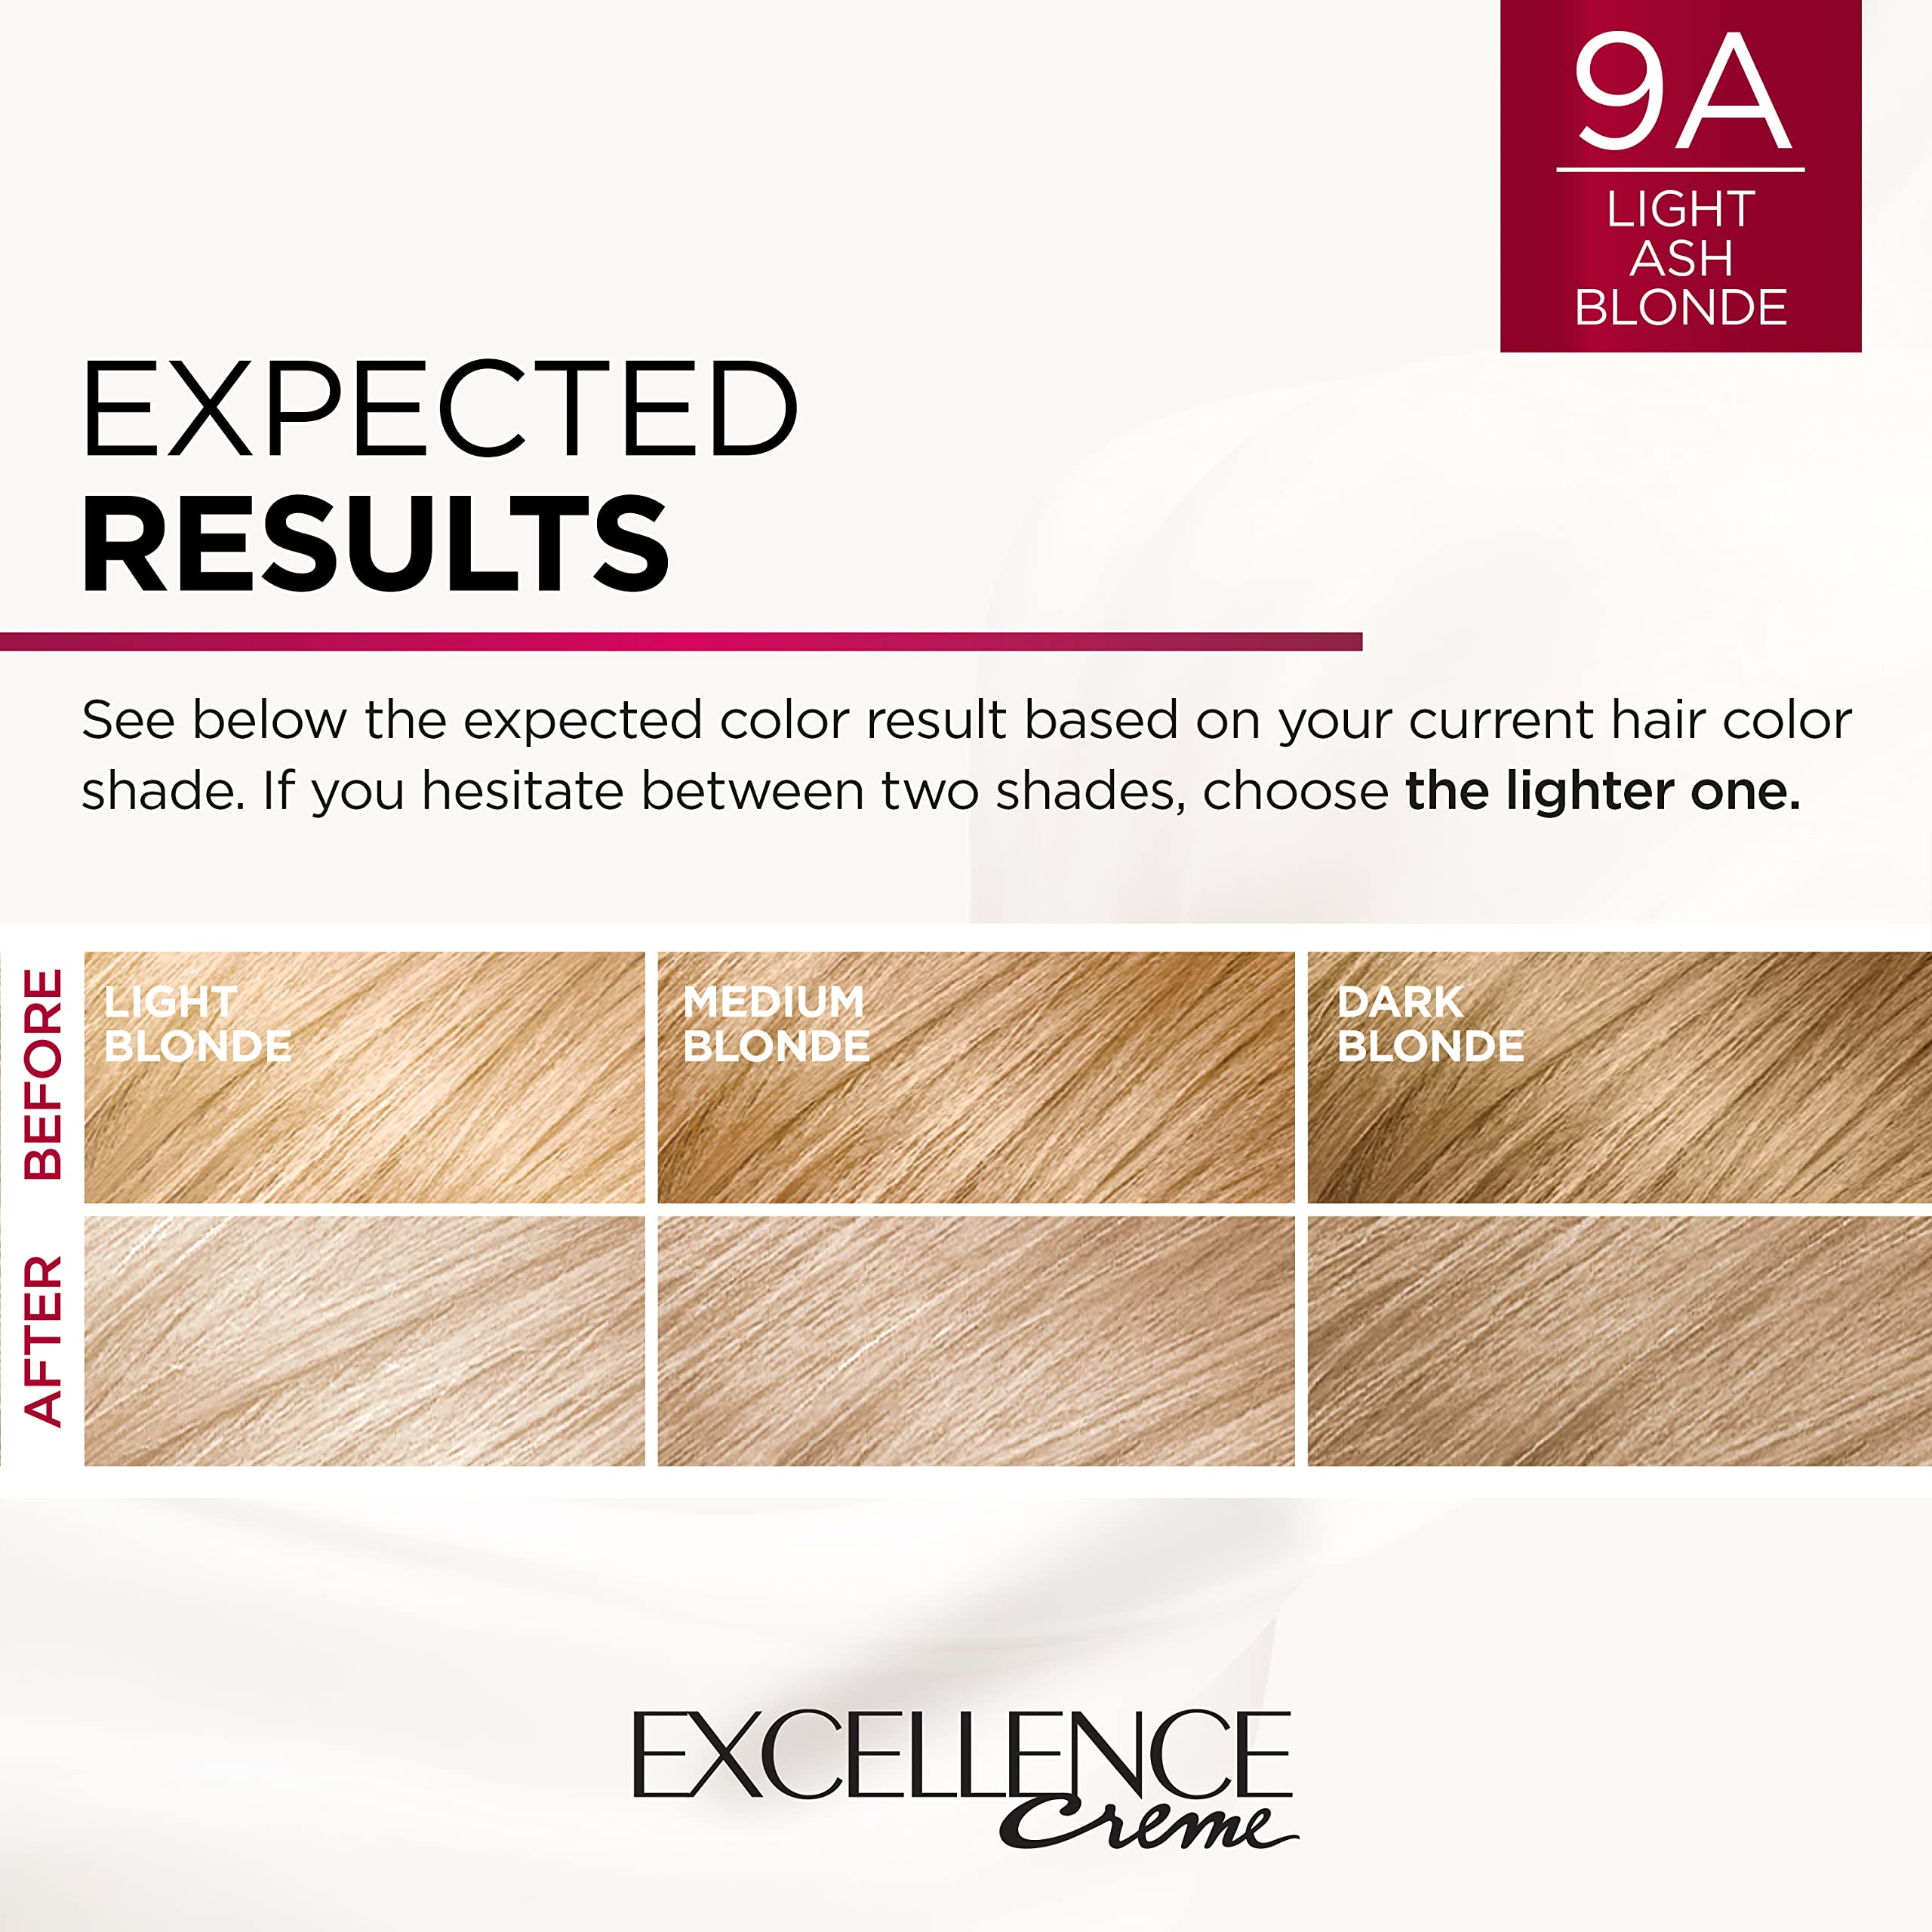 L'Oreal Paris Excellence Creme Permanent Triple Care Hair Color, 9A Light Ash Blonde, Gray Coverage For Up to 8 Weeks, All Hair Types, Pack of 1